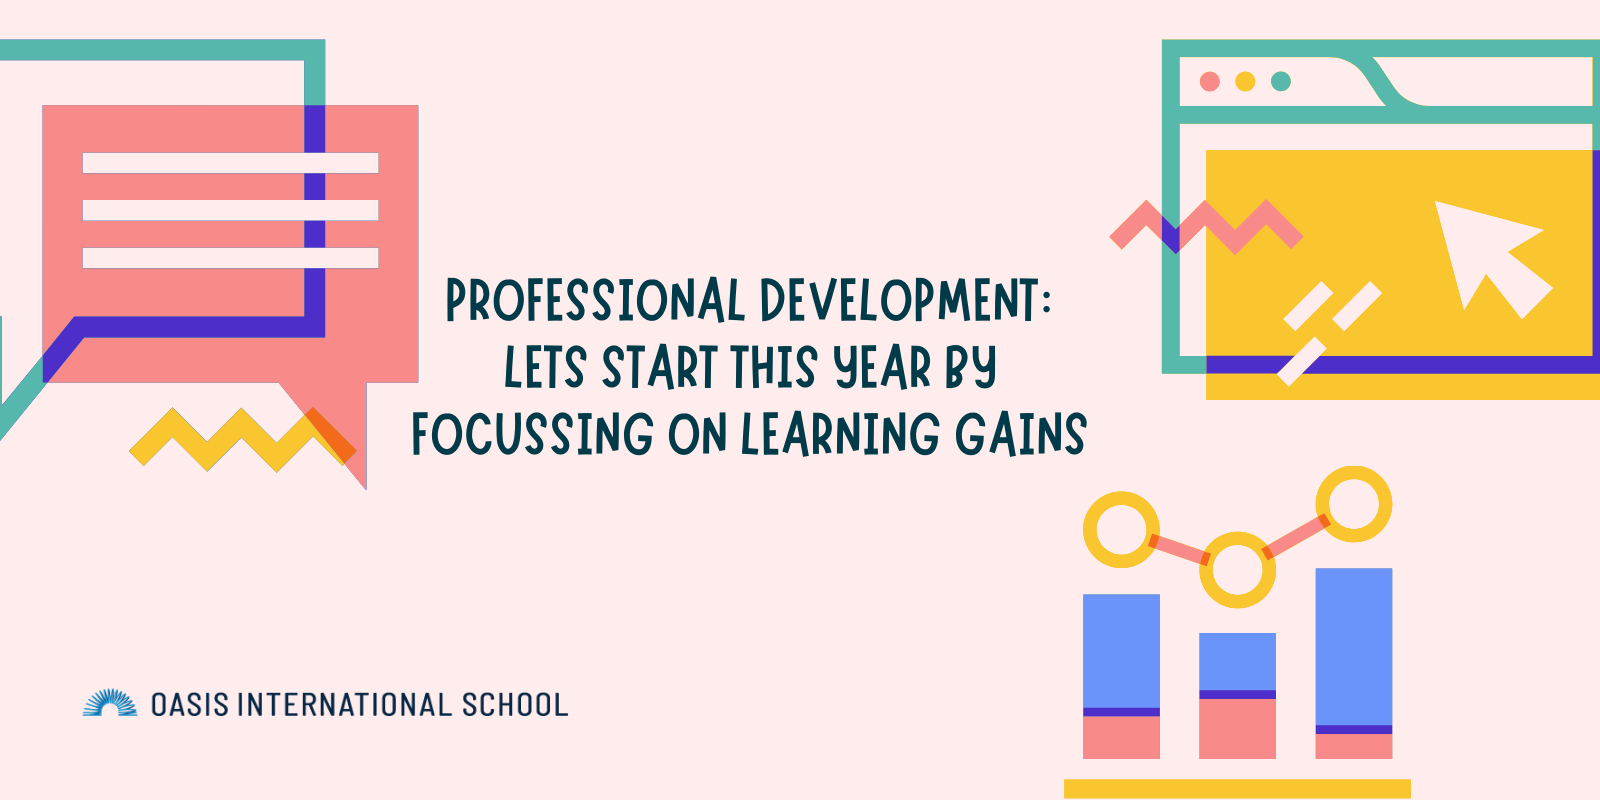 Professional Development – Let’s start this year by focusing on learning gains